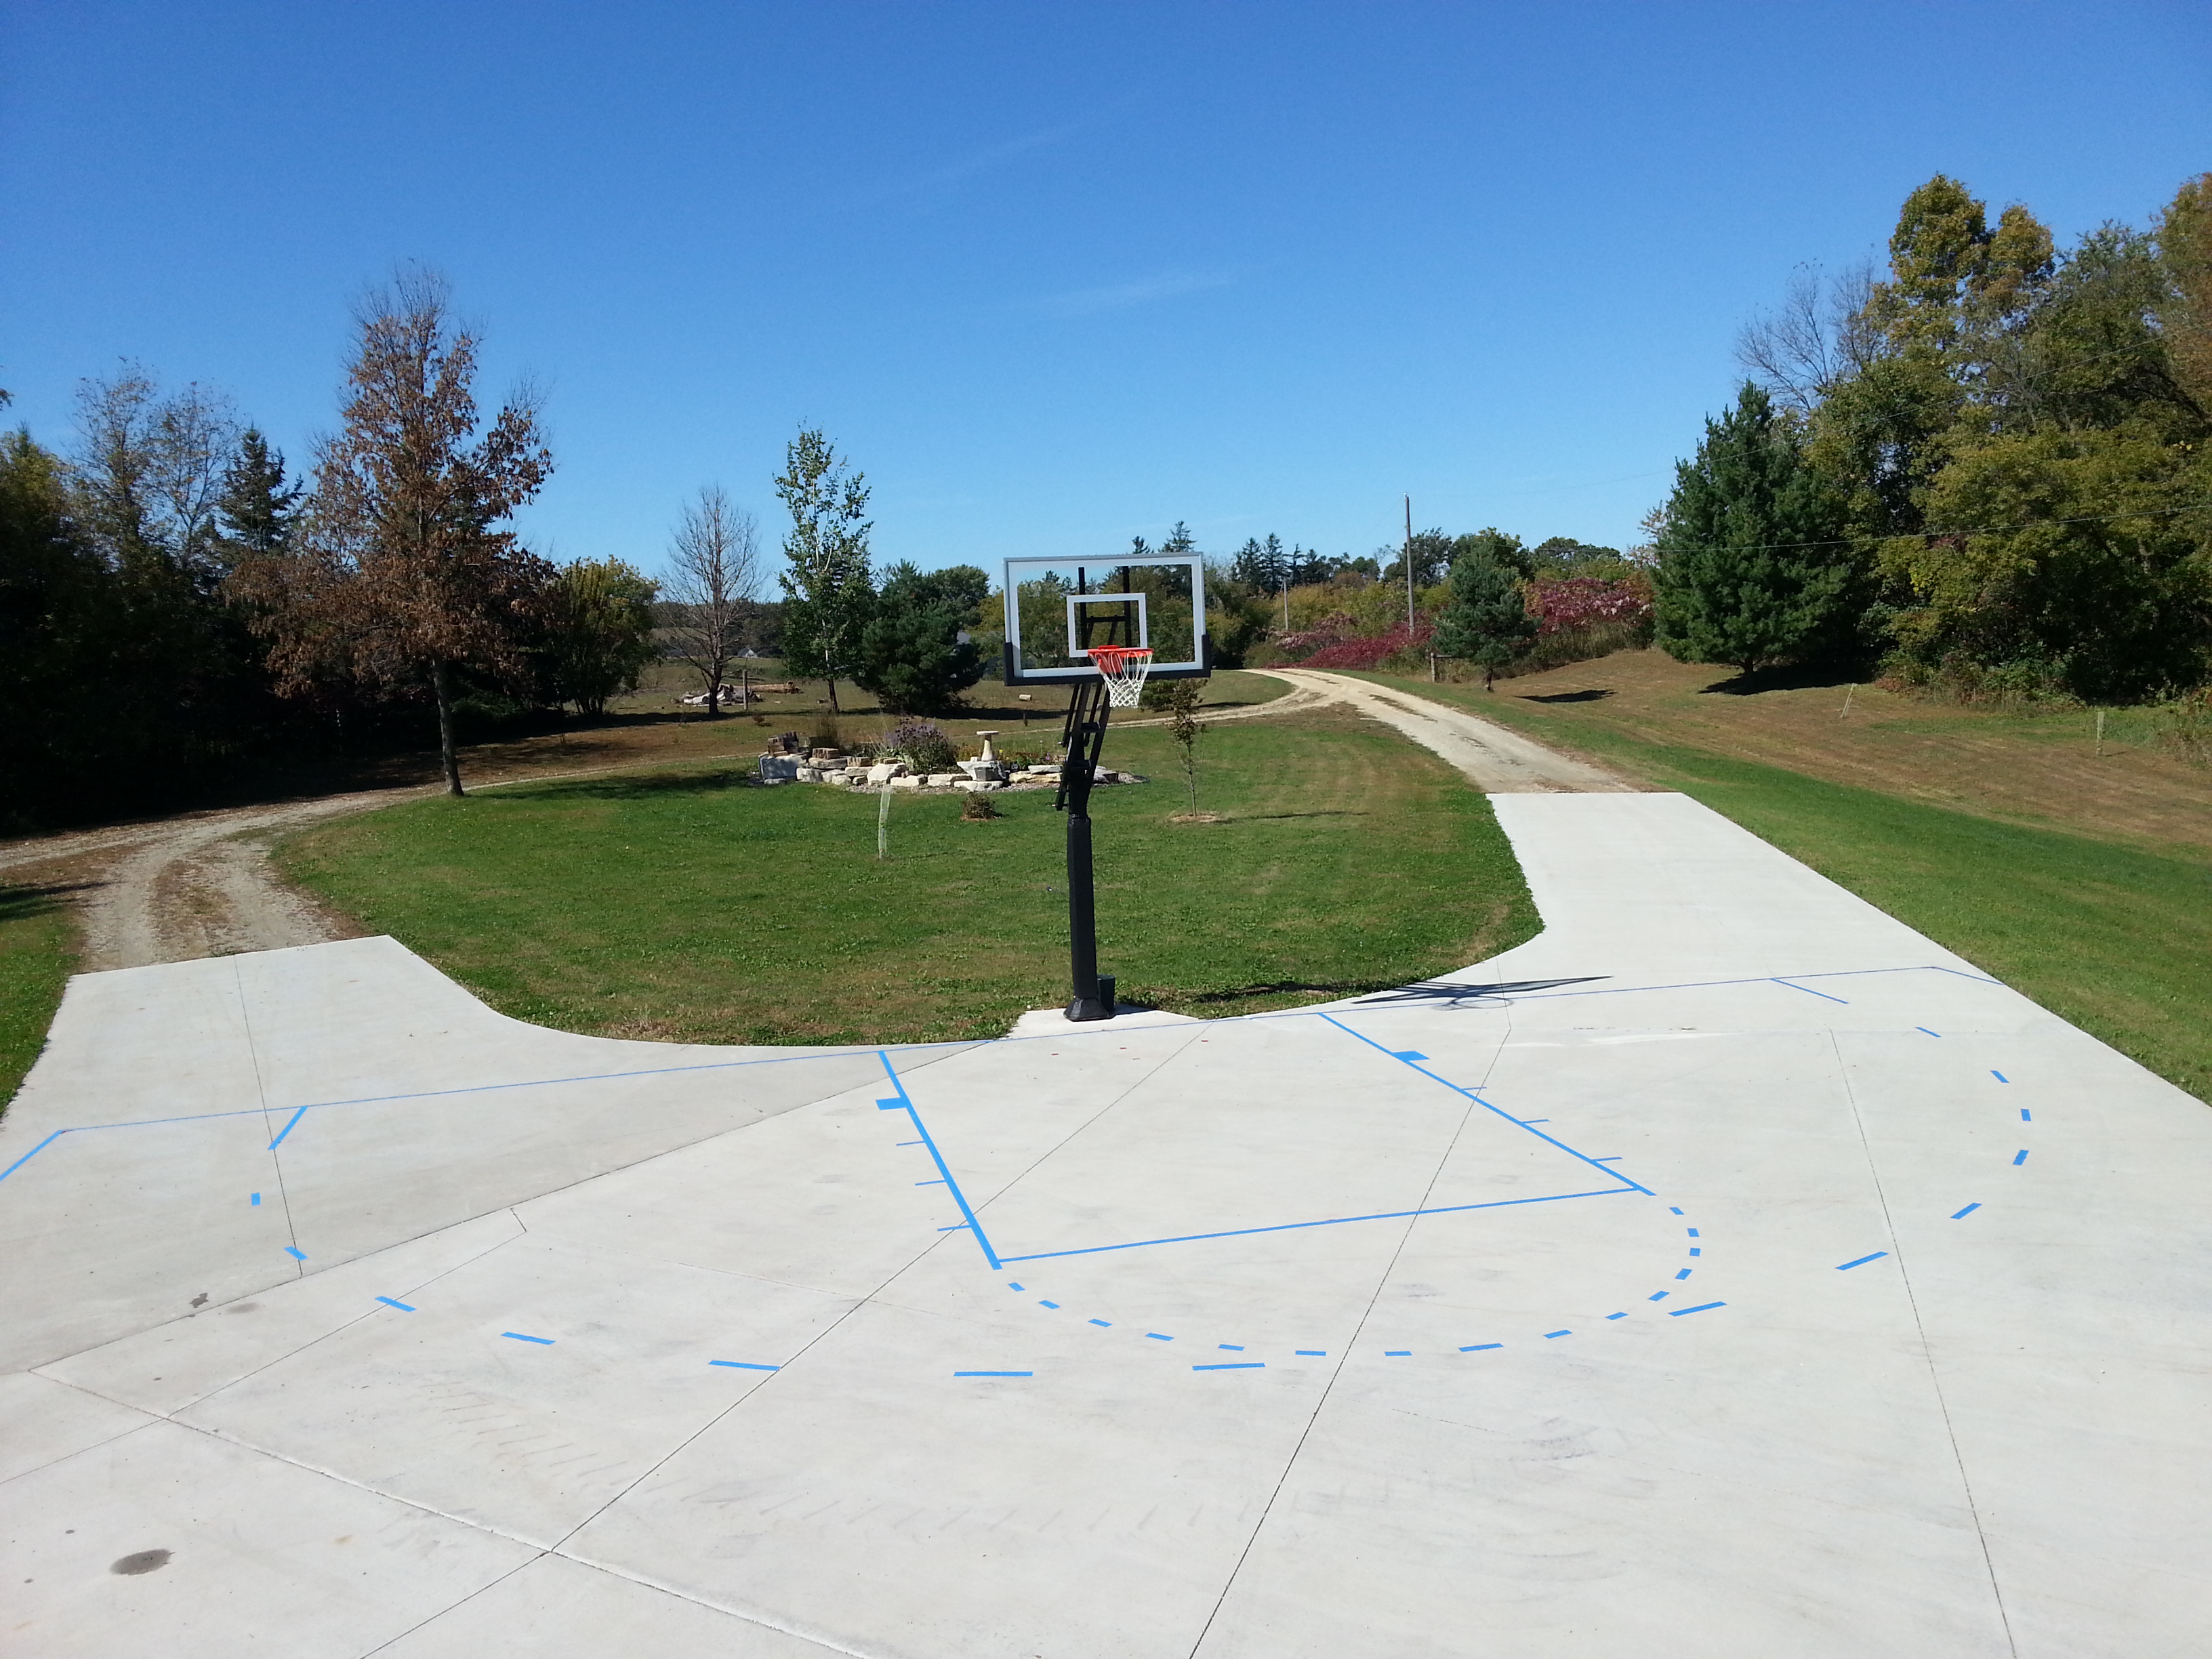 Almost finished with painting the lines on the driveway.